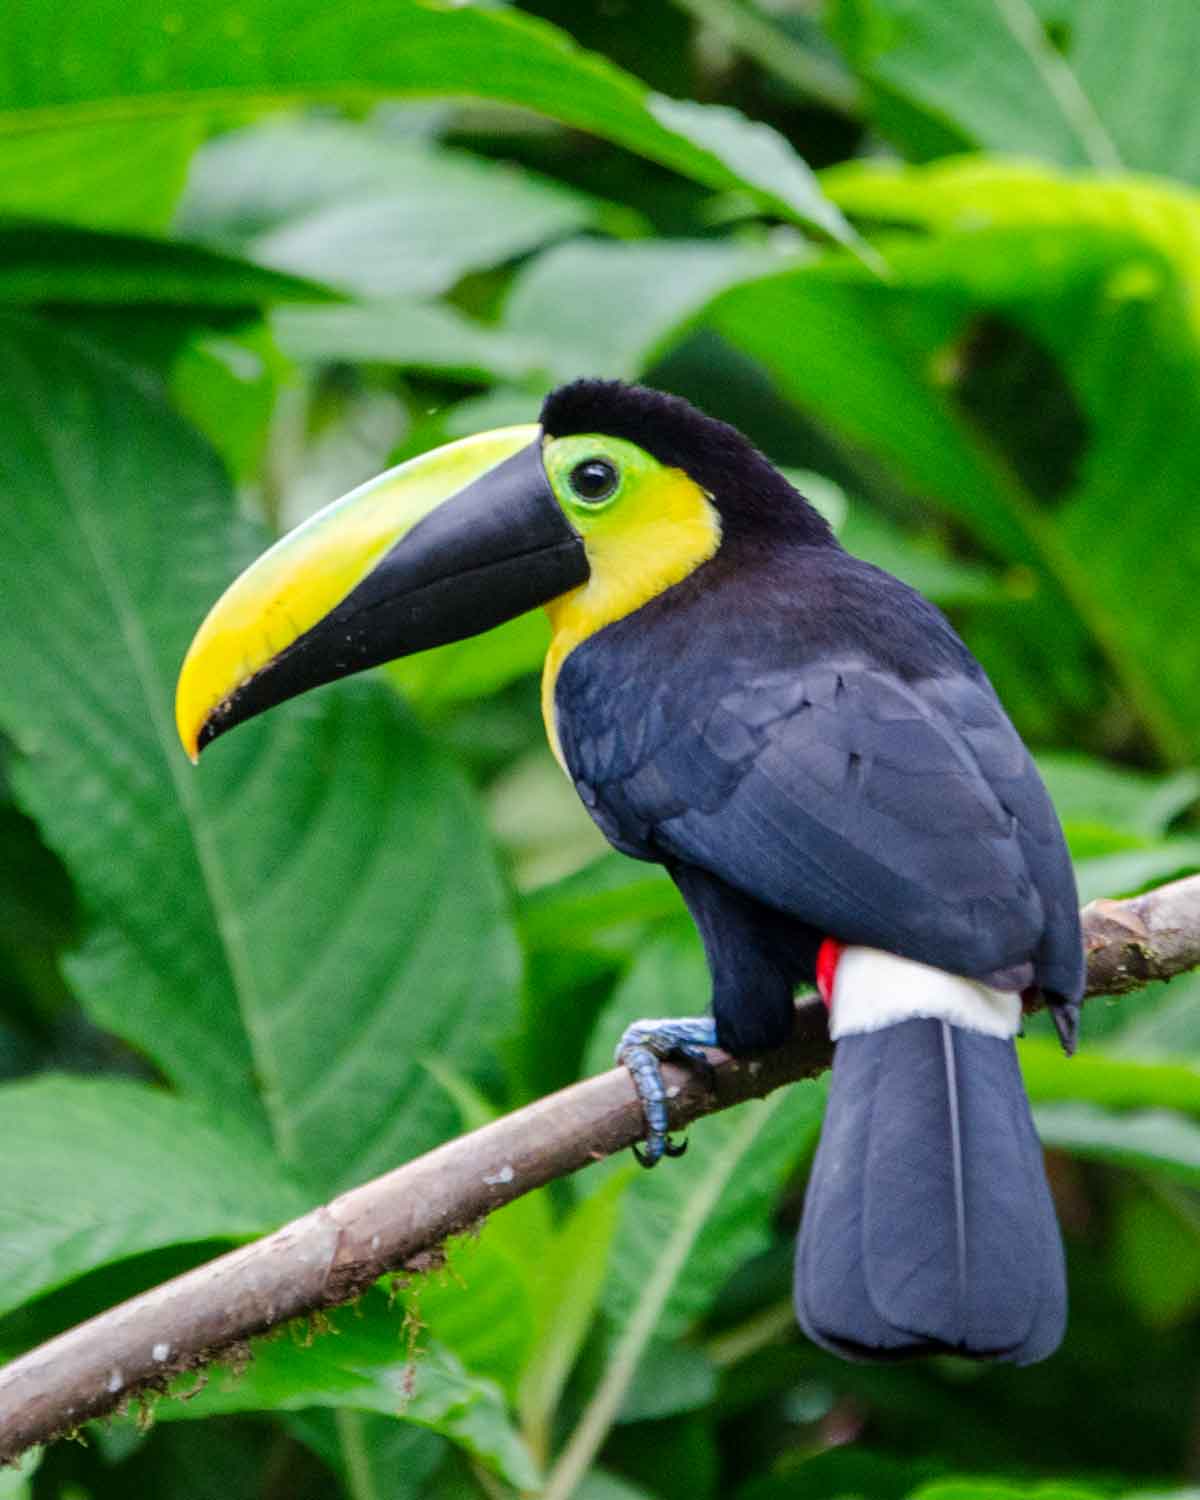 The endemic Choco Toucan seen at the Mindo Cloud Forest Foundation | ©Angela Drake